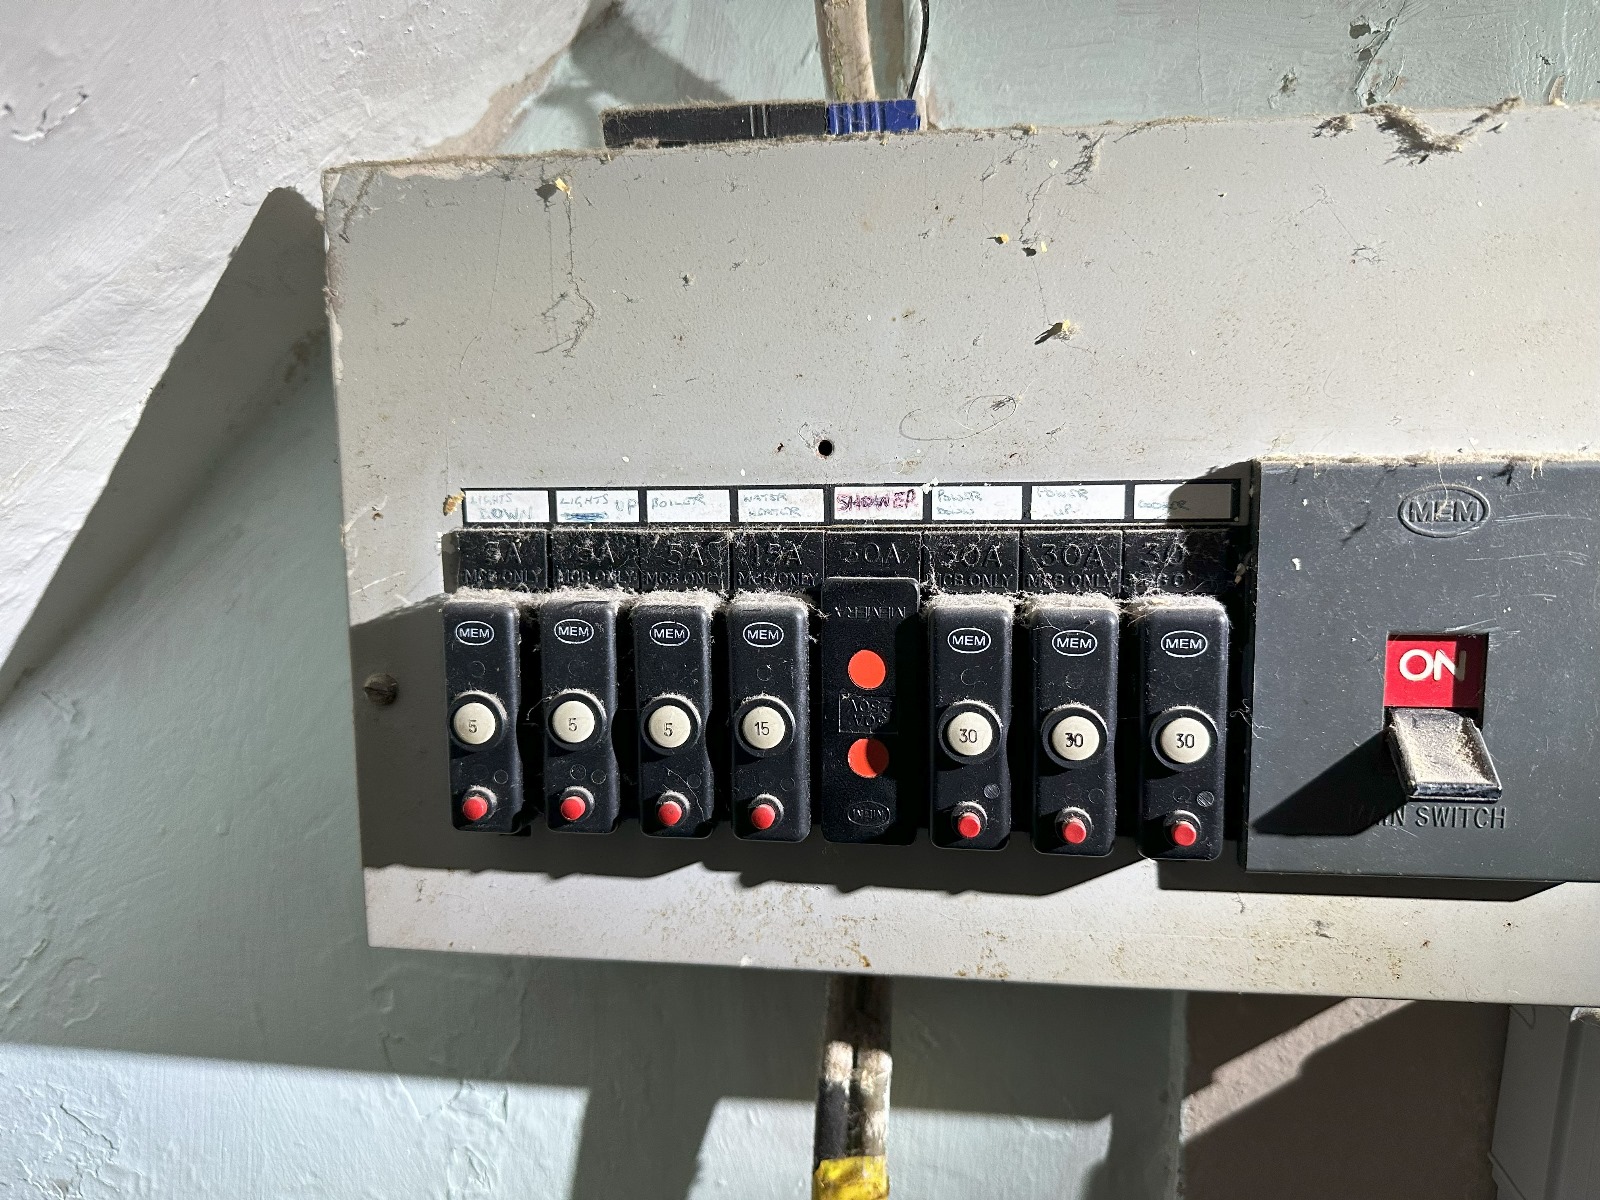 An old, outdated, unsafe fusebox